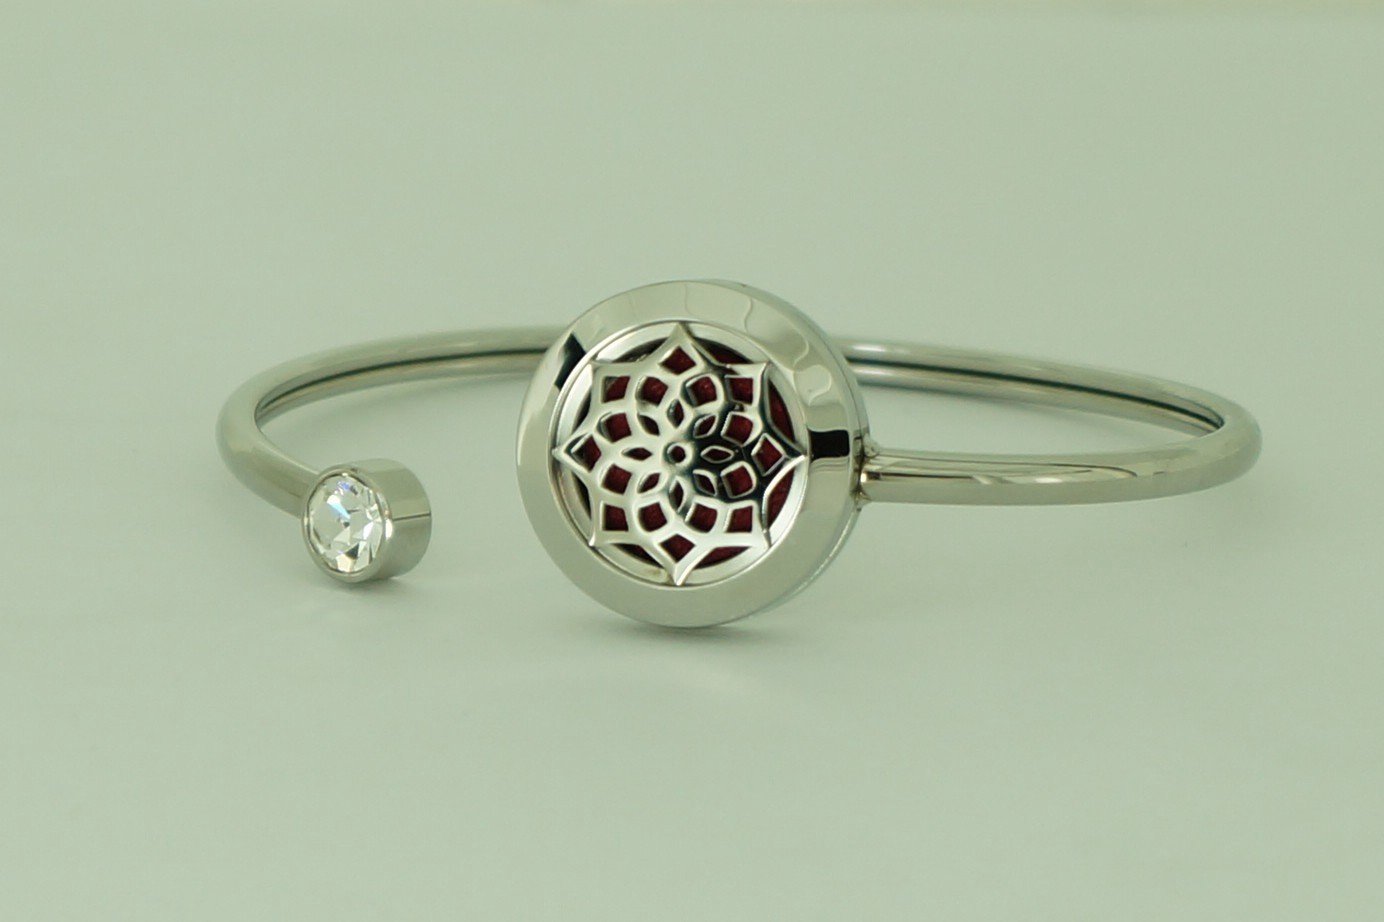 Bracelet - with Locket for Essential Oil - Flower (small)